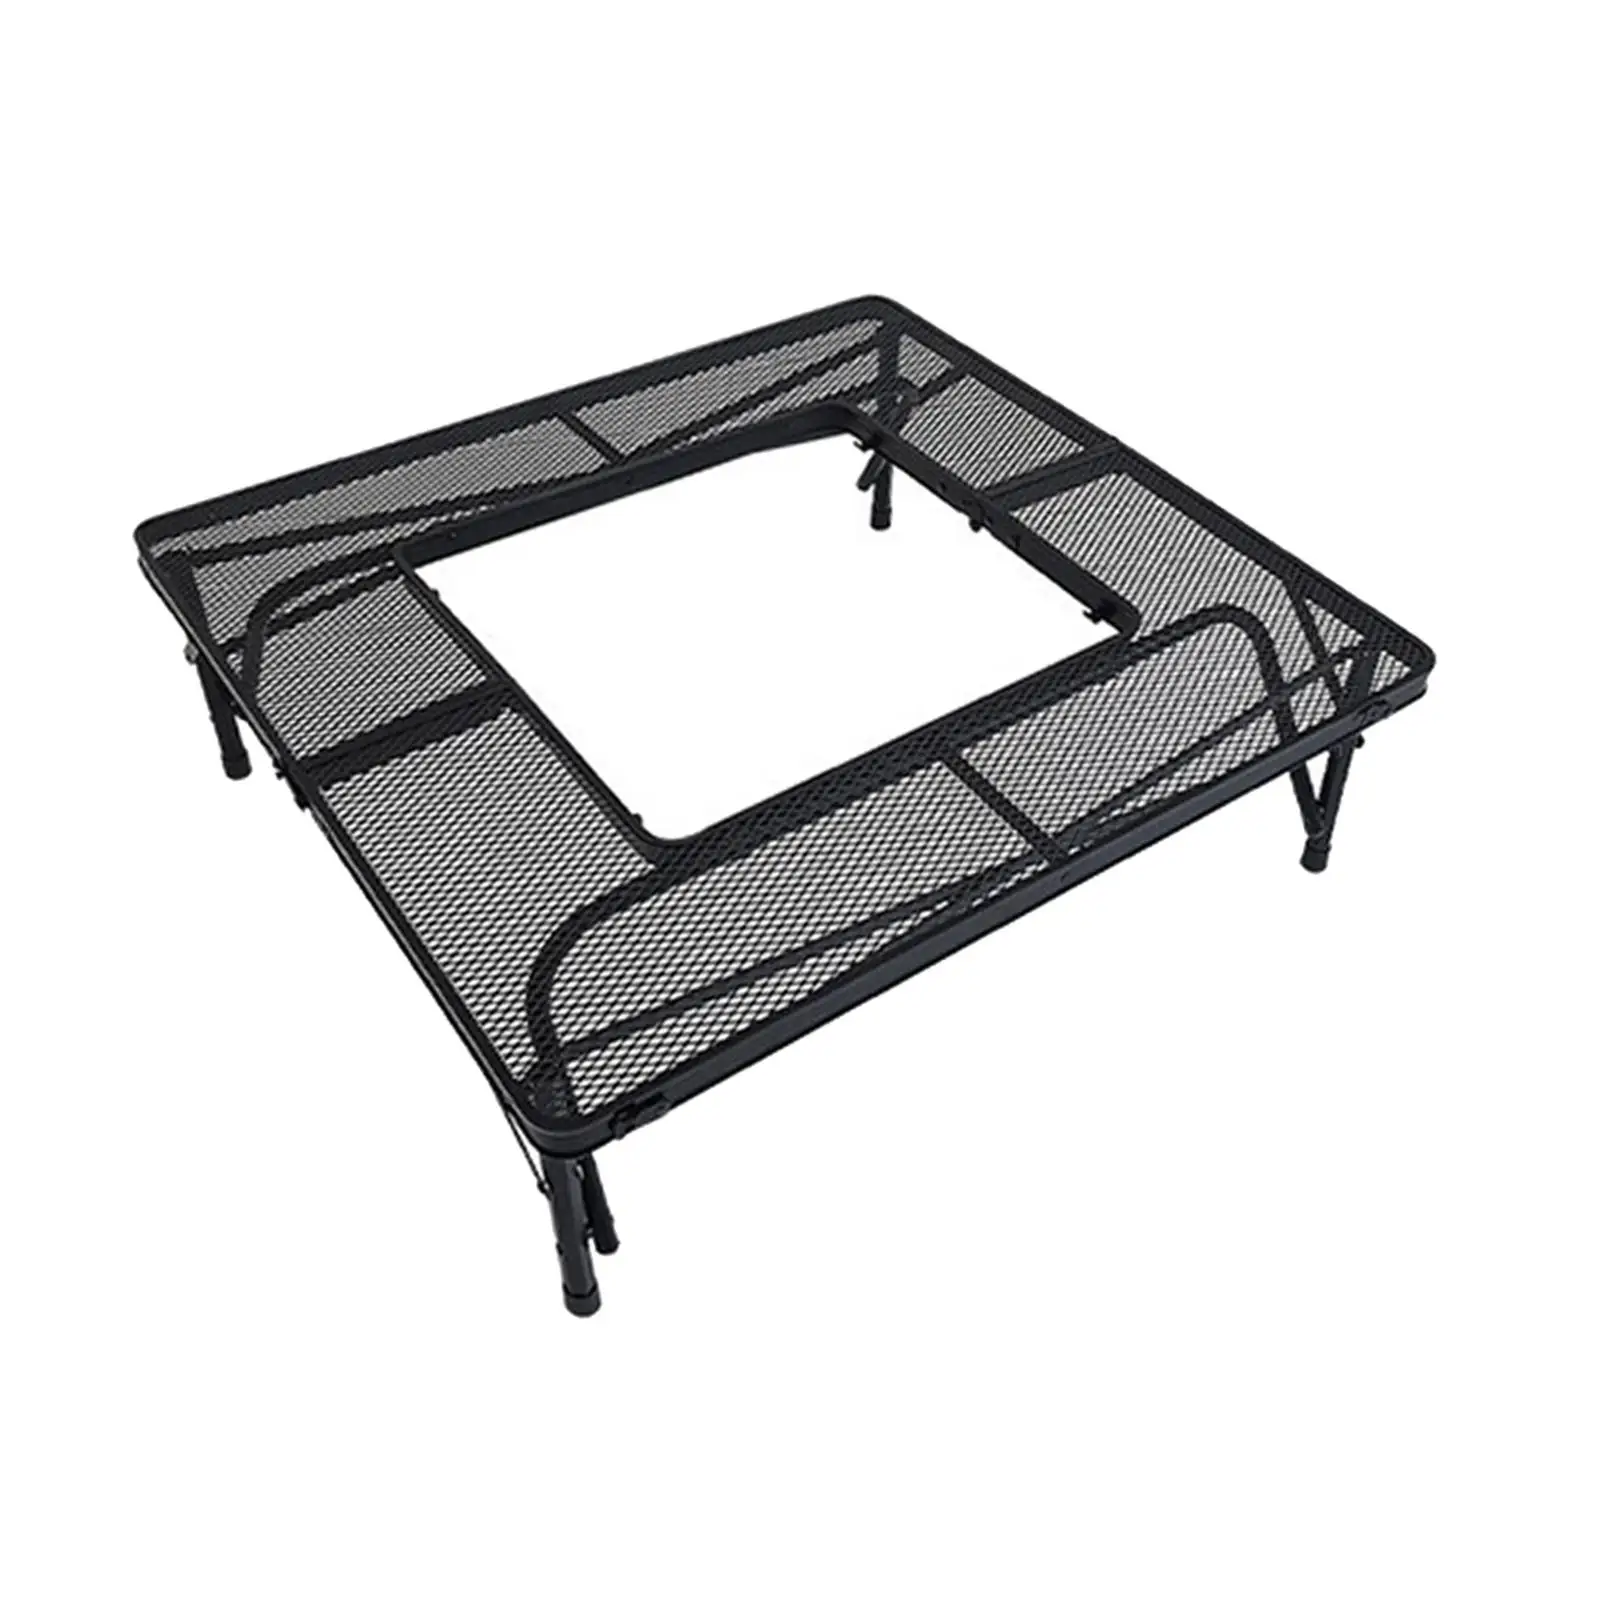 Outdoor Foldable Table with A Carry Bag Camping Tables Portable Grill Table for Park Mountaineering Living Room BBQ Travel